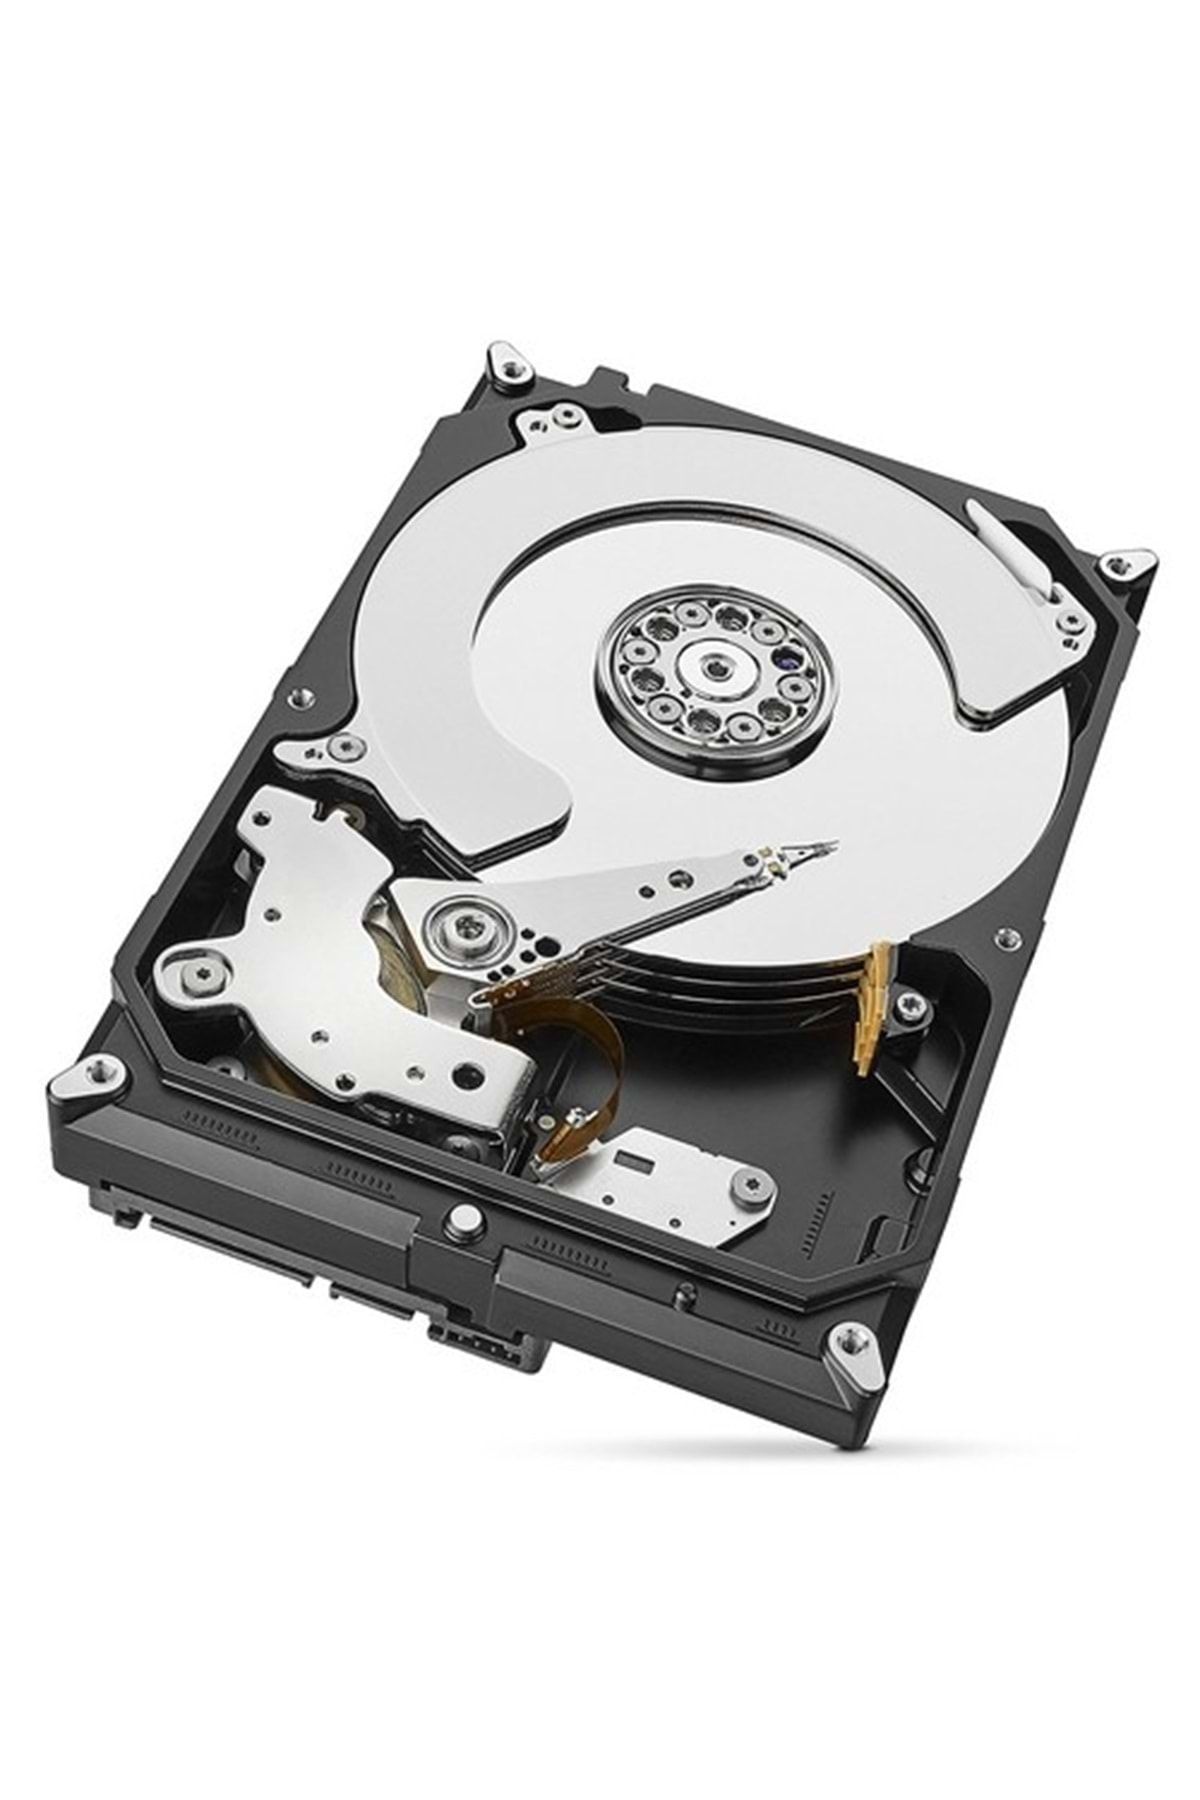 Seagate 2tb 3.5" 5900rpm 64mb Ironwolf Nas St2000vn004